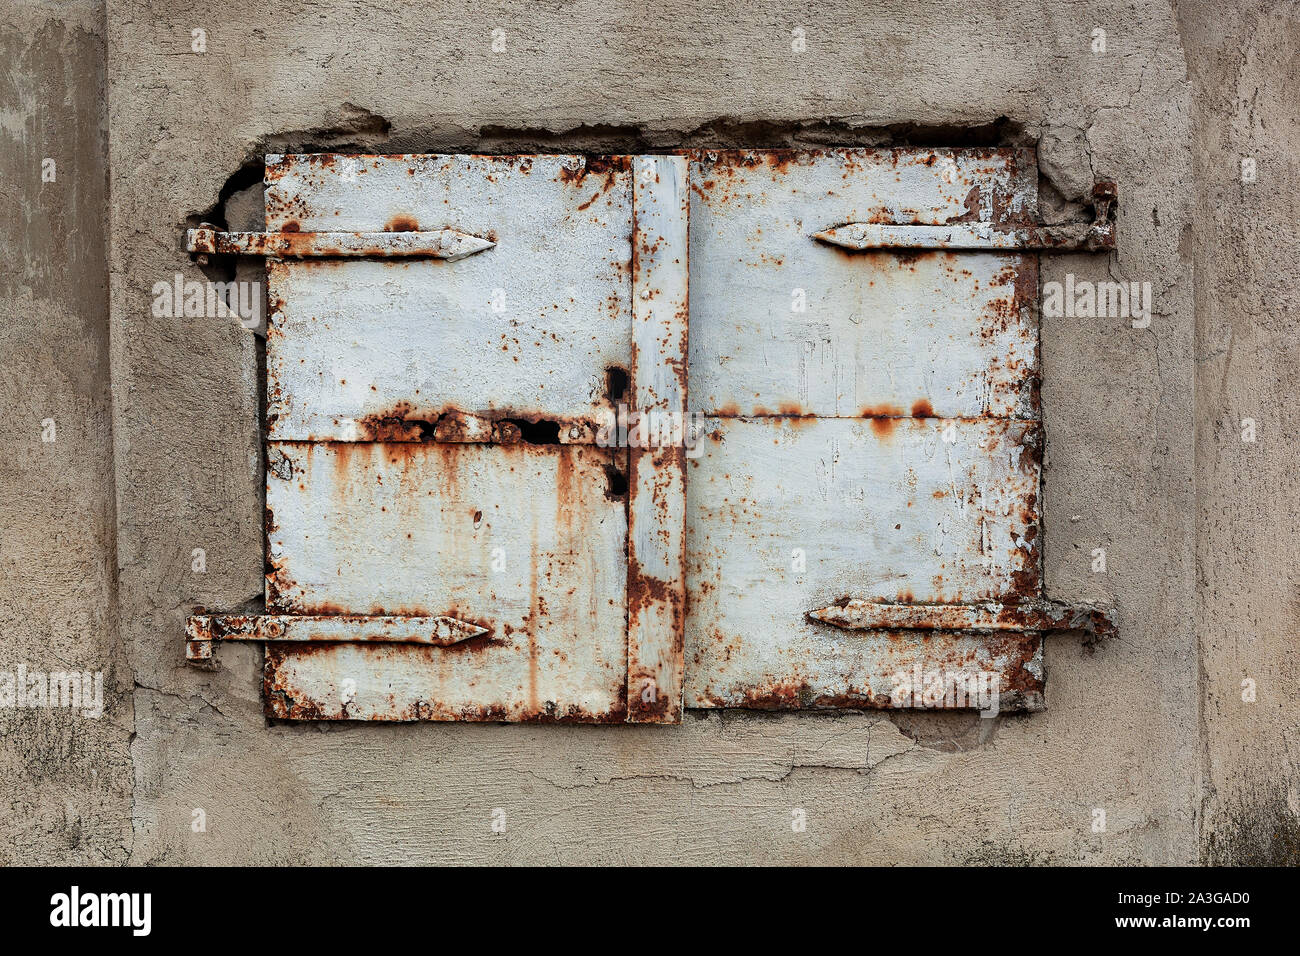 Old, rusty and weathered metal window coverings, closed shut on building exterior Stock Photo